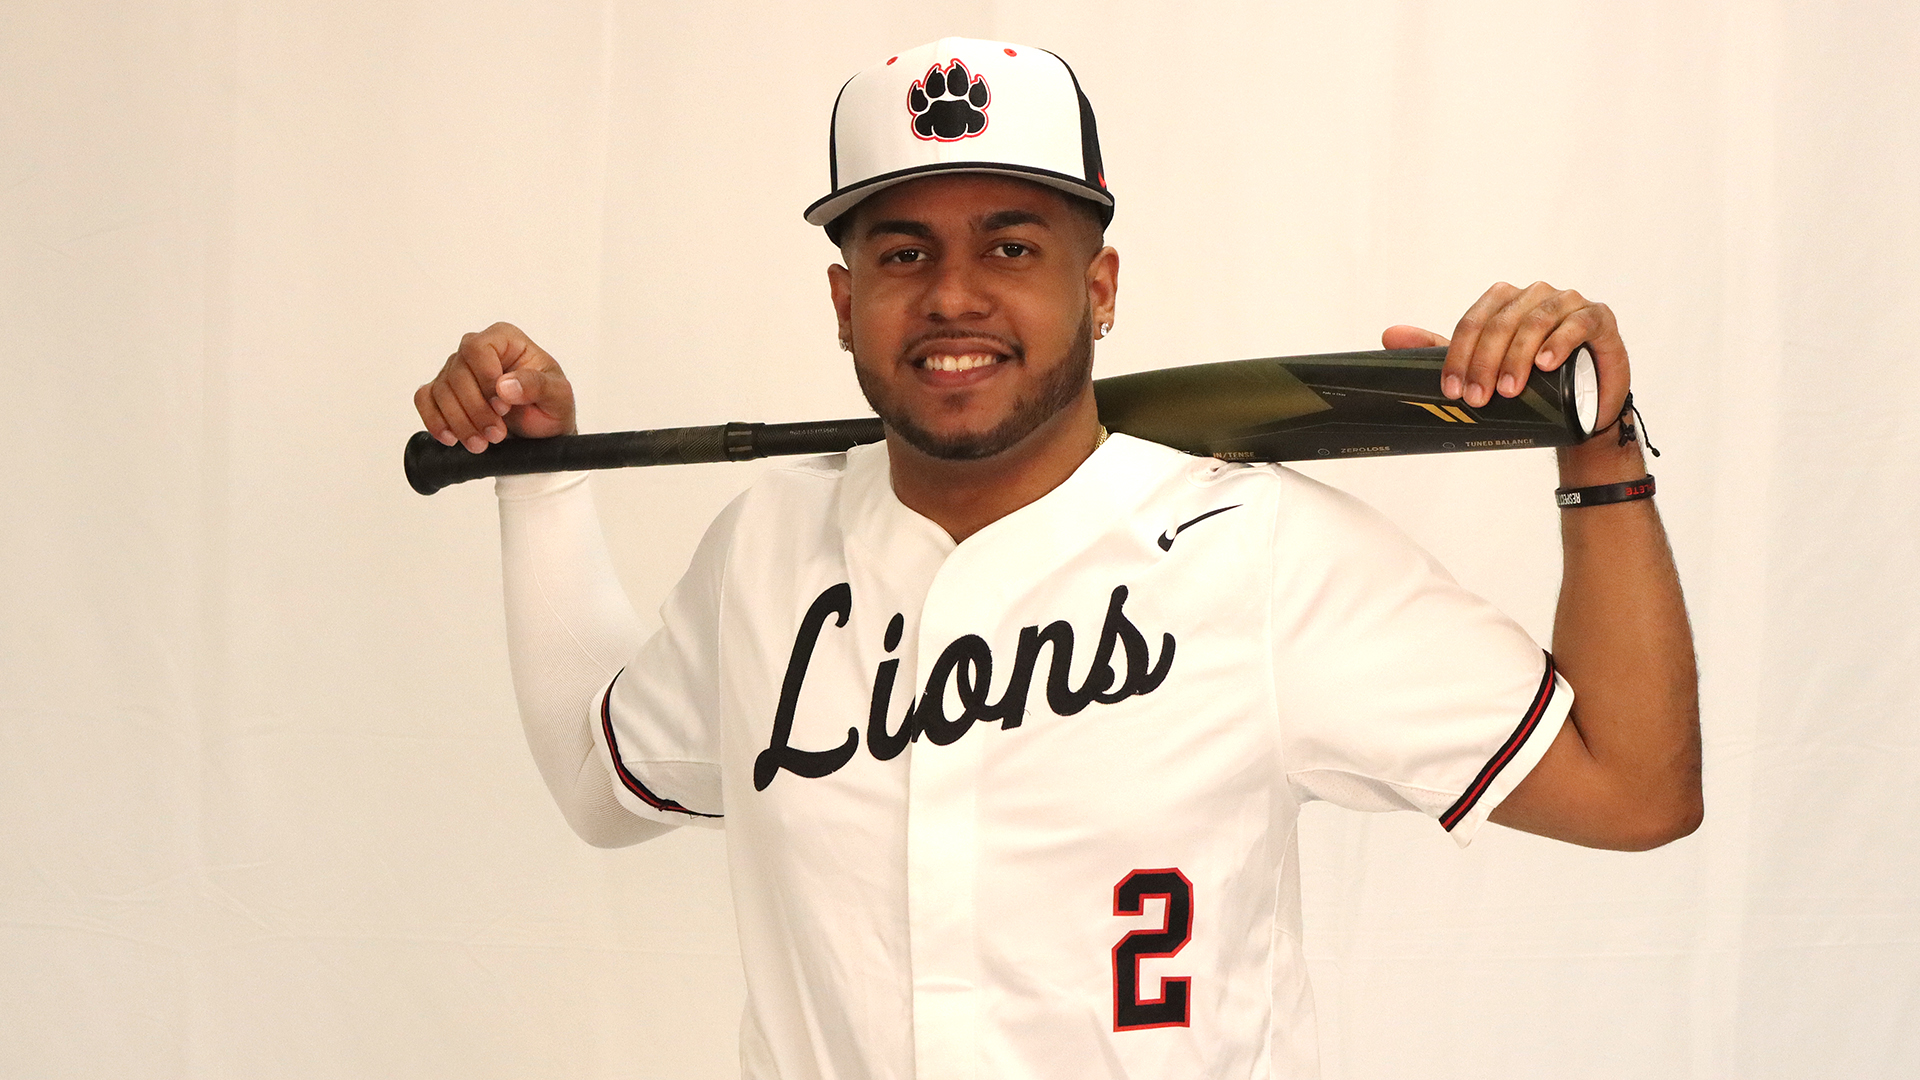 Anderson Jimenez Tabbed North Atlantic Conference Baseball Player of the Week